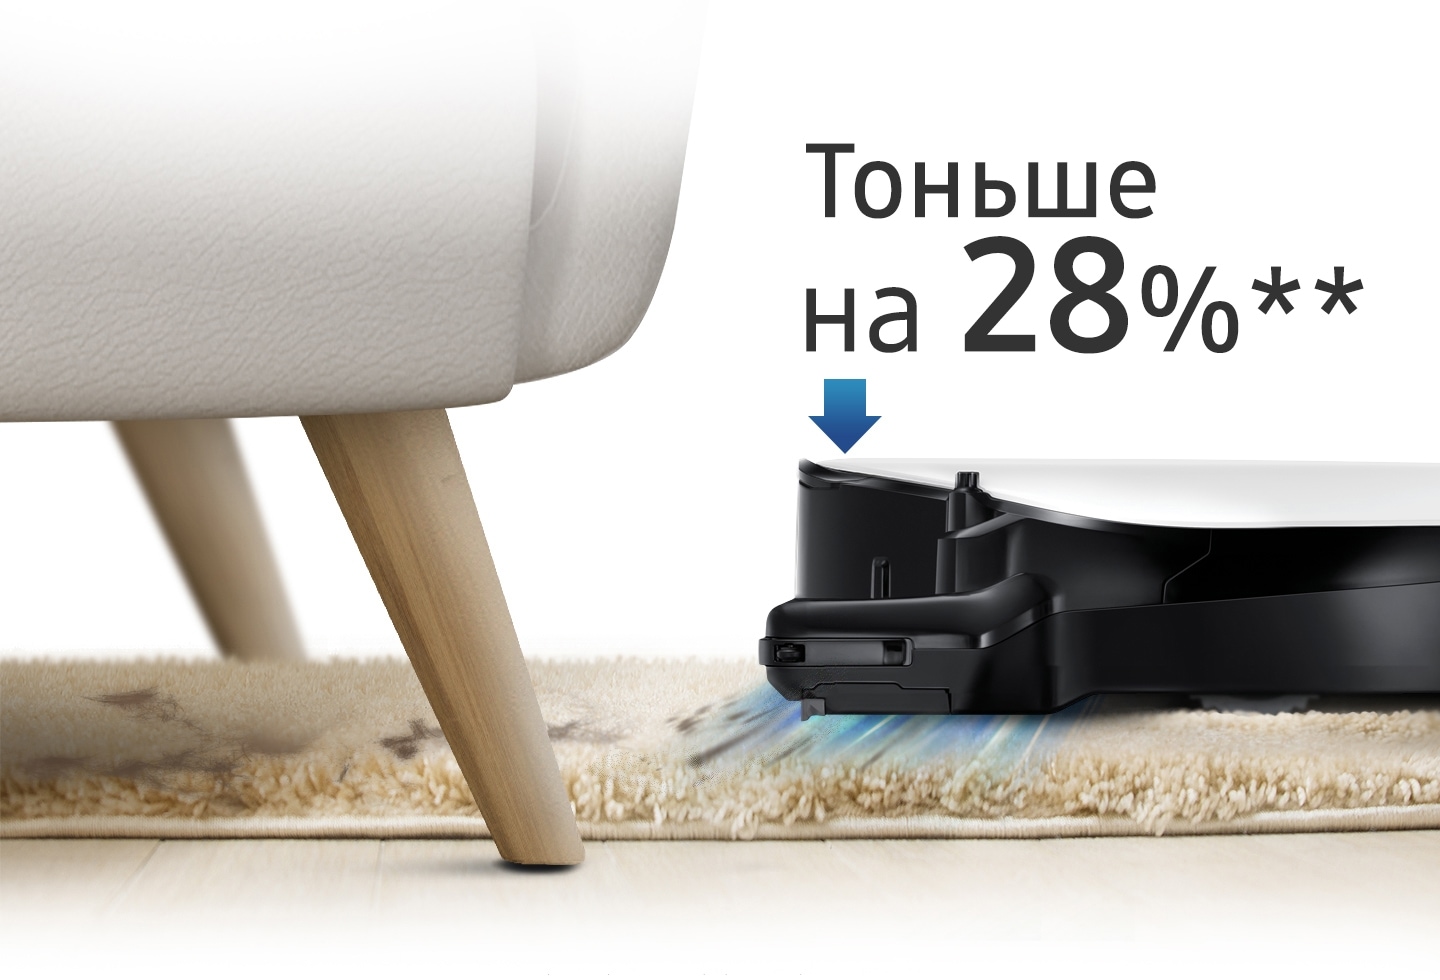 An image showing a POWERbot VR7010 device vacuuming a carpet and cleaning under a sofa, as well as an arrow icon and text that reads '28% slimmer.'